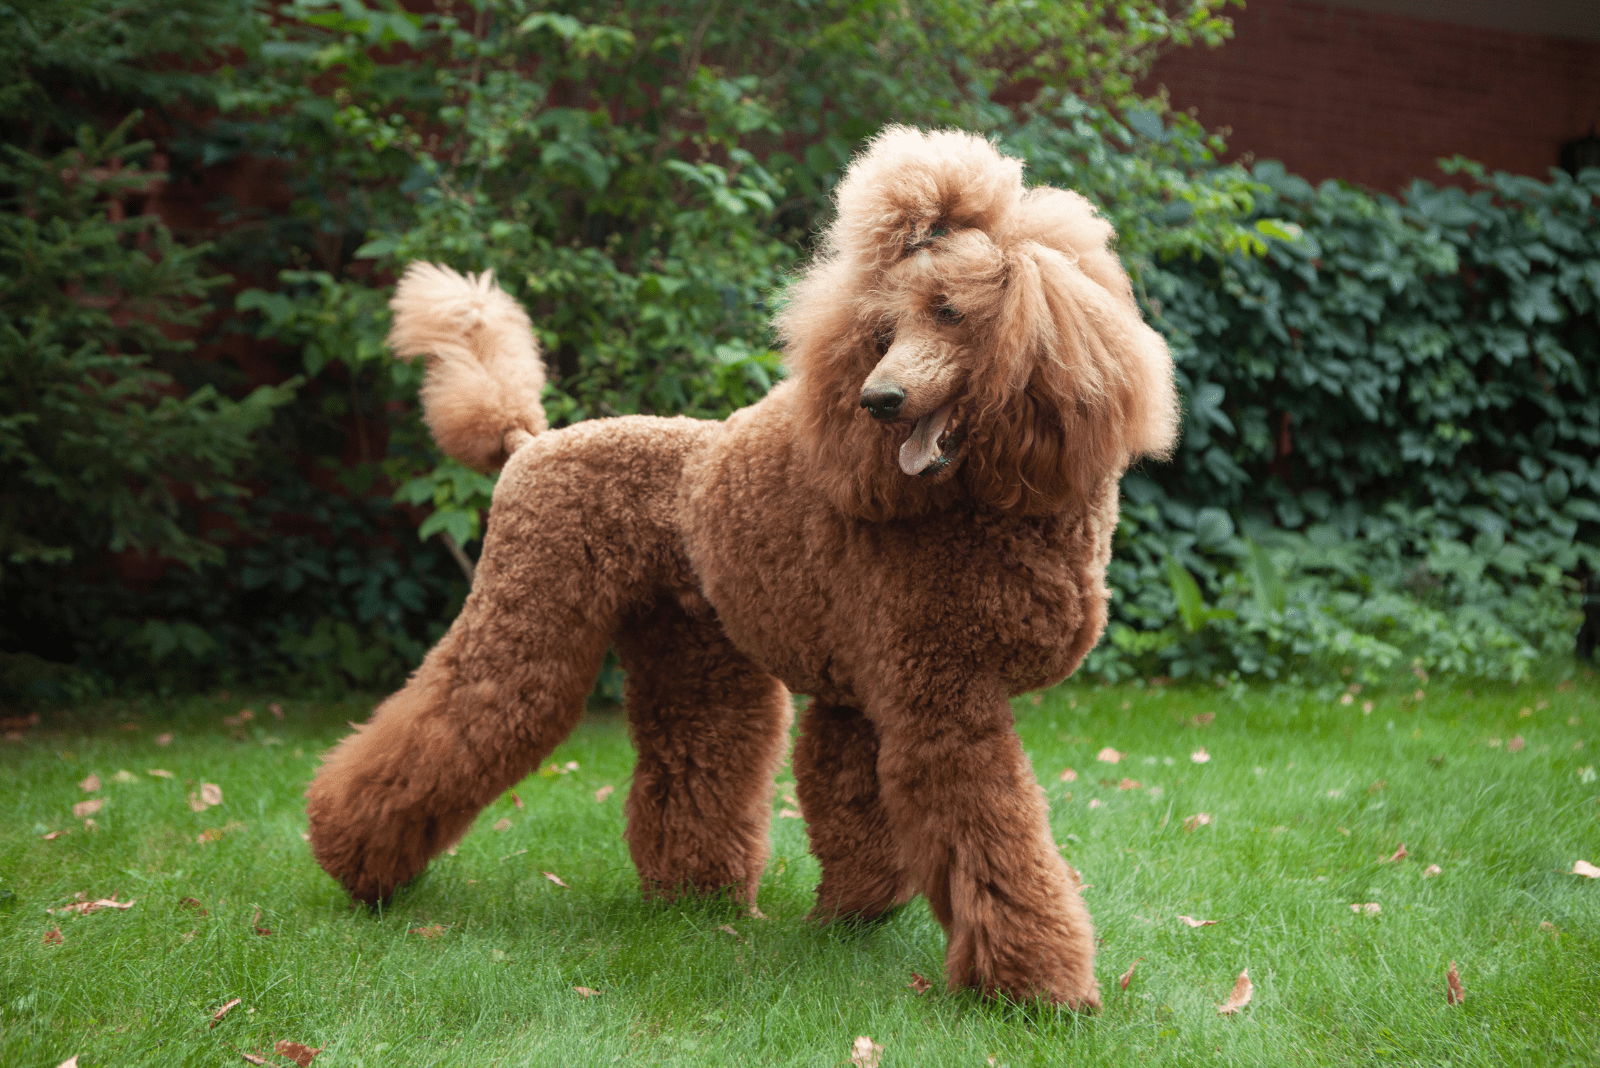 A poodle is standing on the lawn